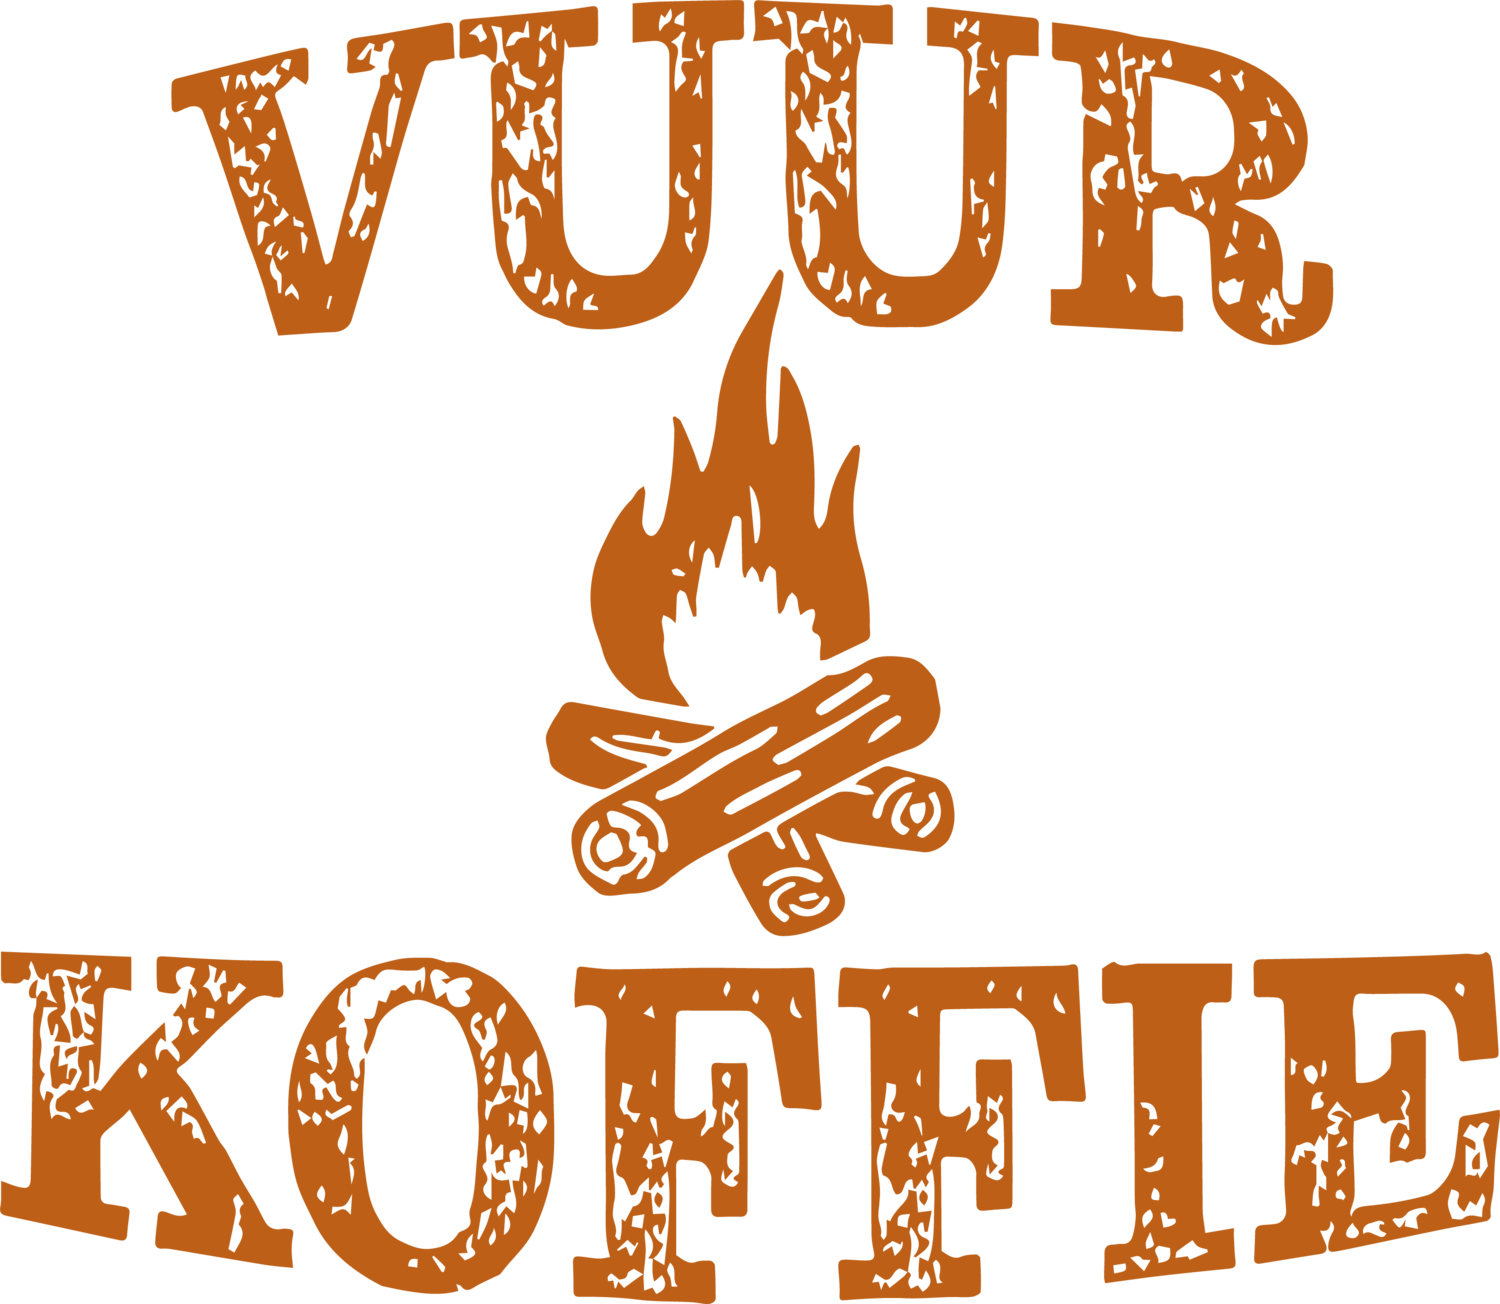 Vuurkoffie